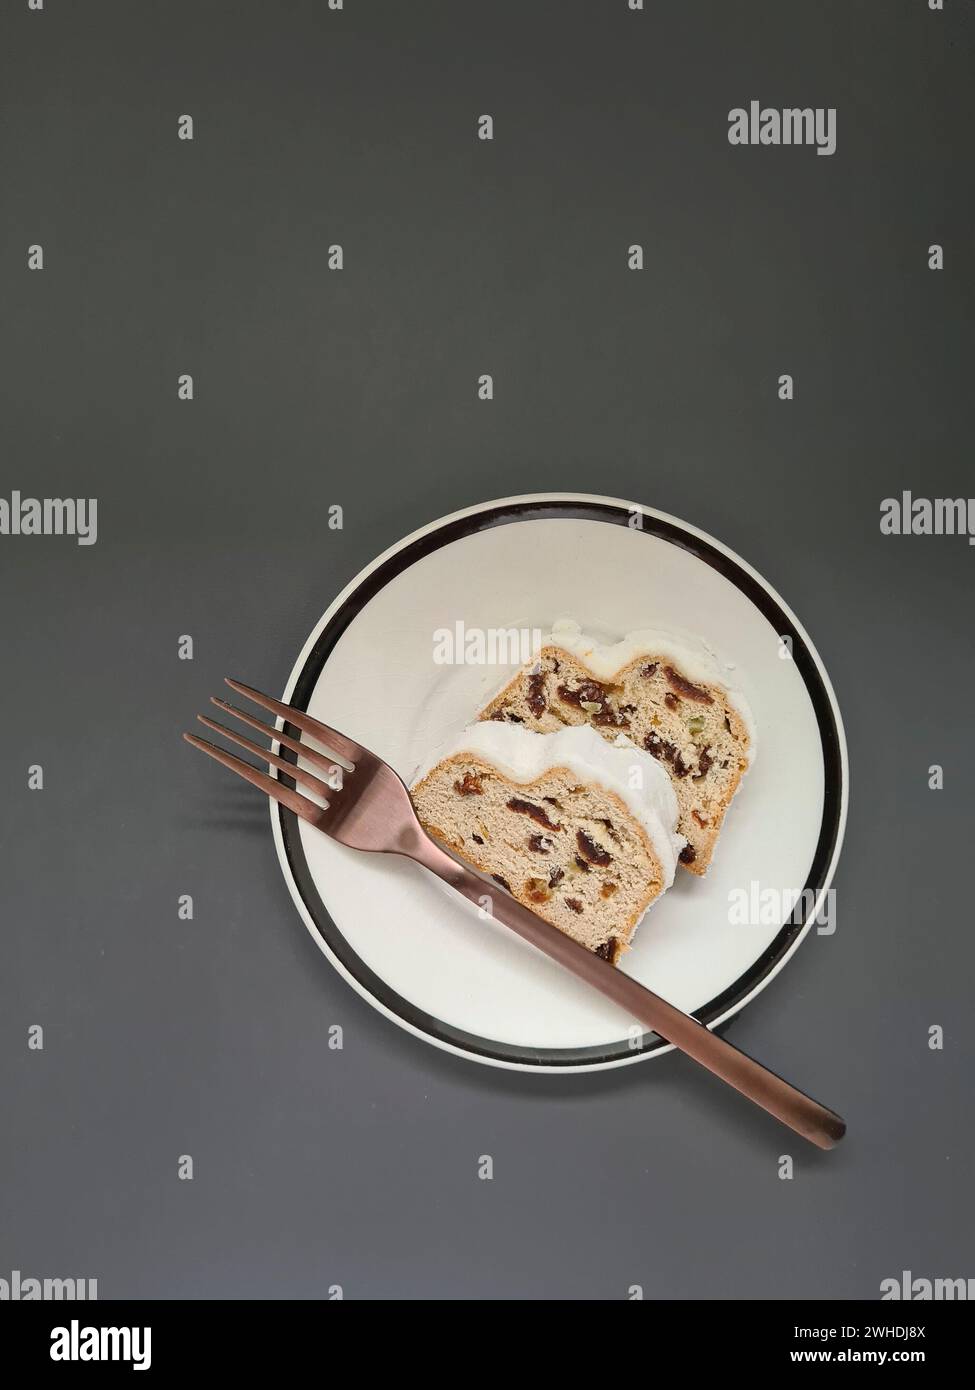 Two slices of Christmas cake with white powdered sugar on a white plate with a black rim and a copper-colored fork Stock Photo